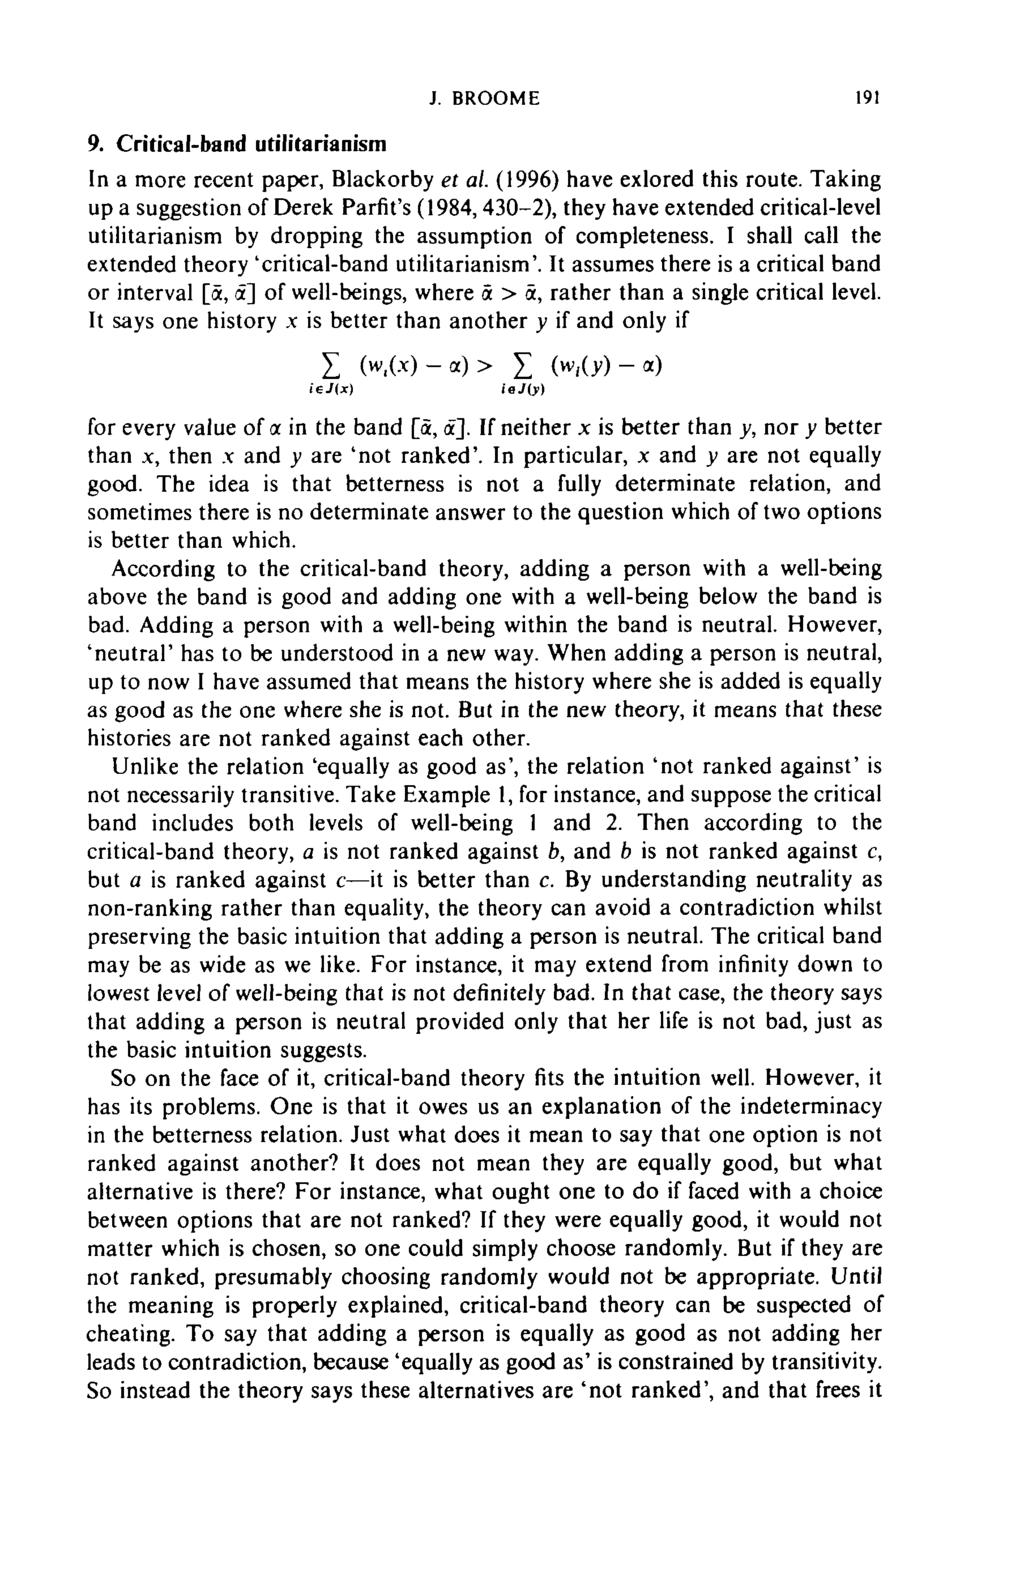 9. Critical-band utilitarianism J. BROOME 191 In a more recent paper, Blackorby et al. (1996) have exlored this route.